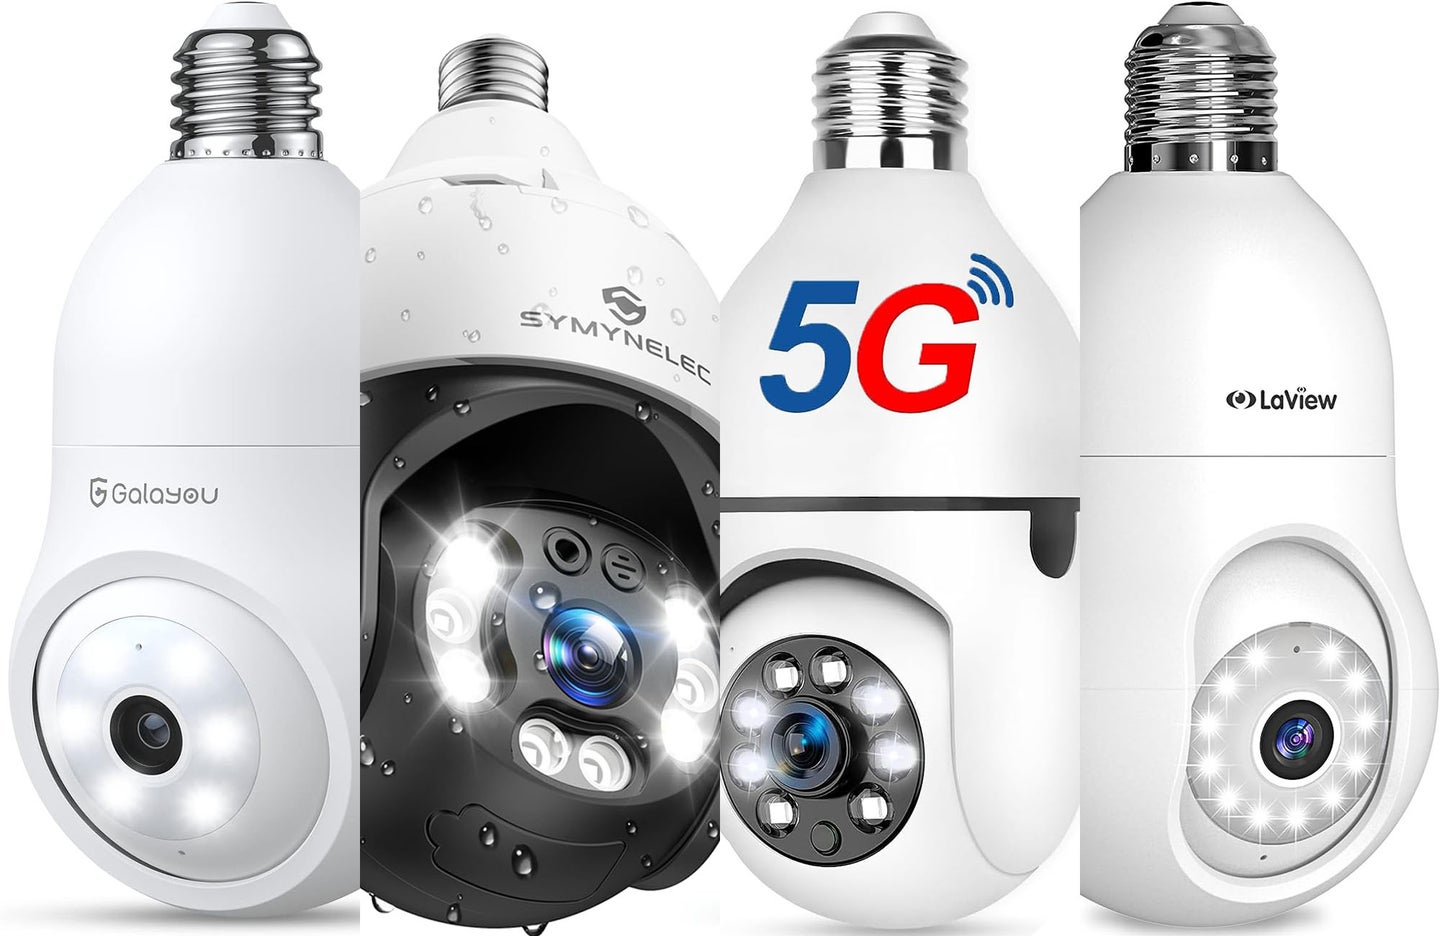 Four examples of the best light bulb security cameras on a white background